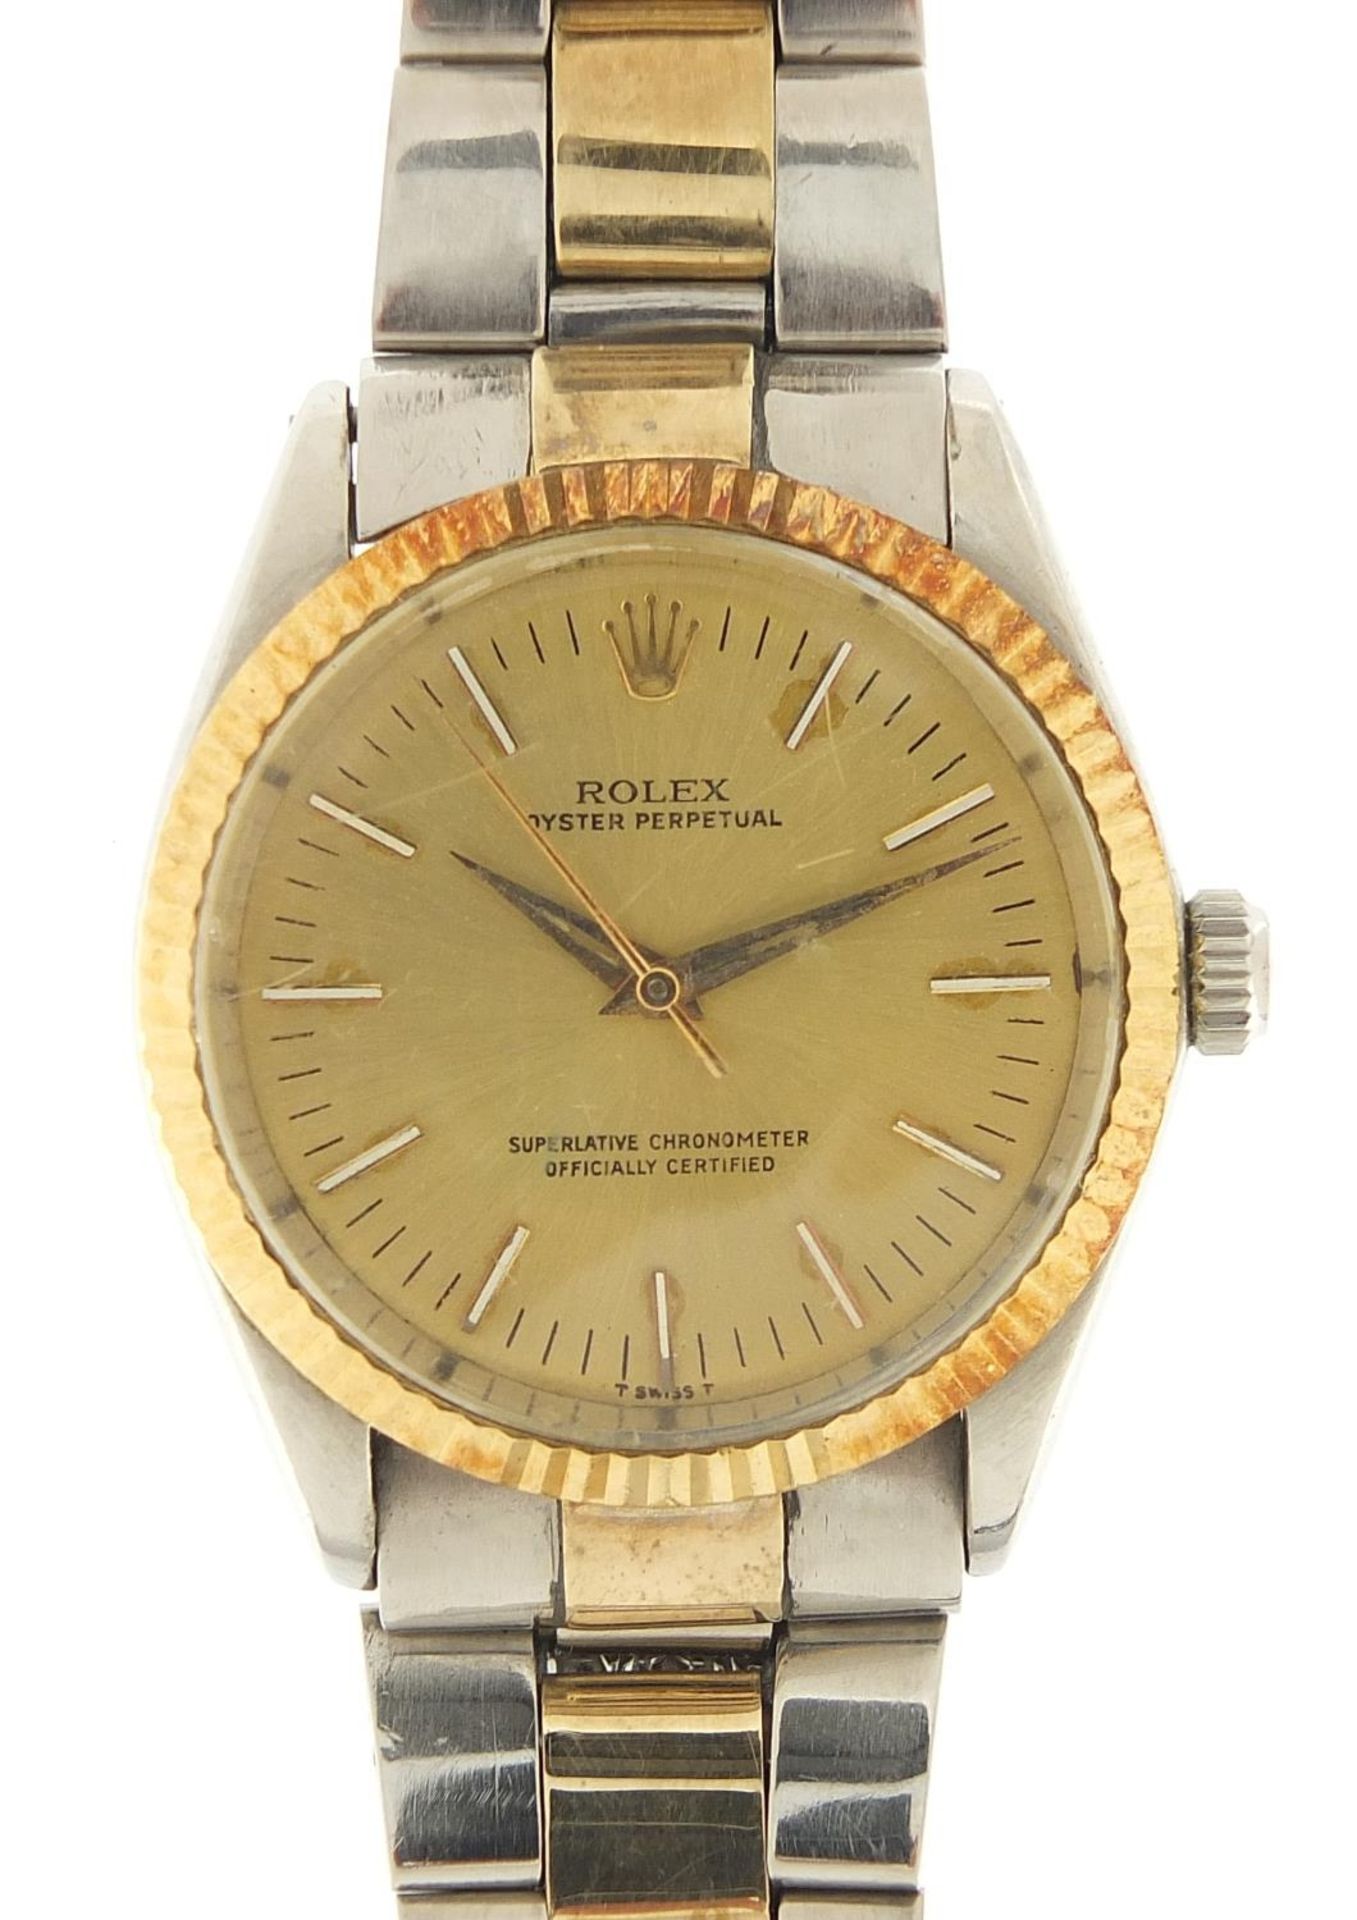 Rolex, gentlemen's Oyster Perpetual automatic wristwatch, 33.5mm in diameter : For Further Condition